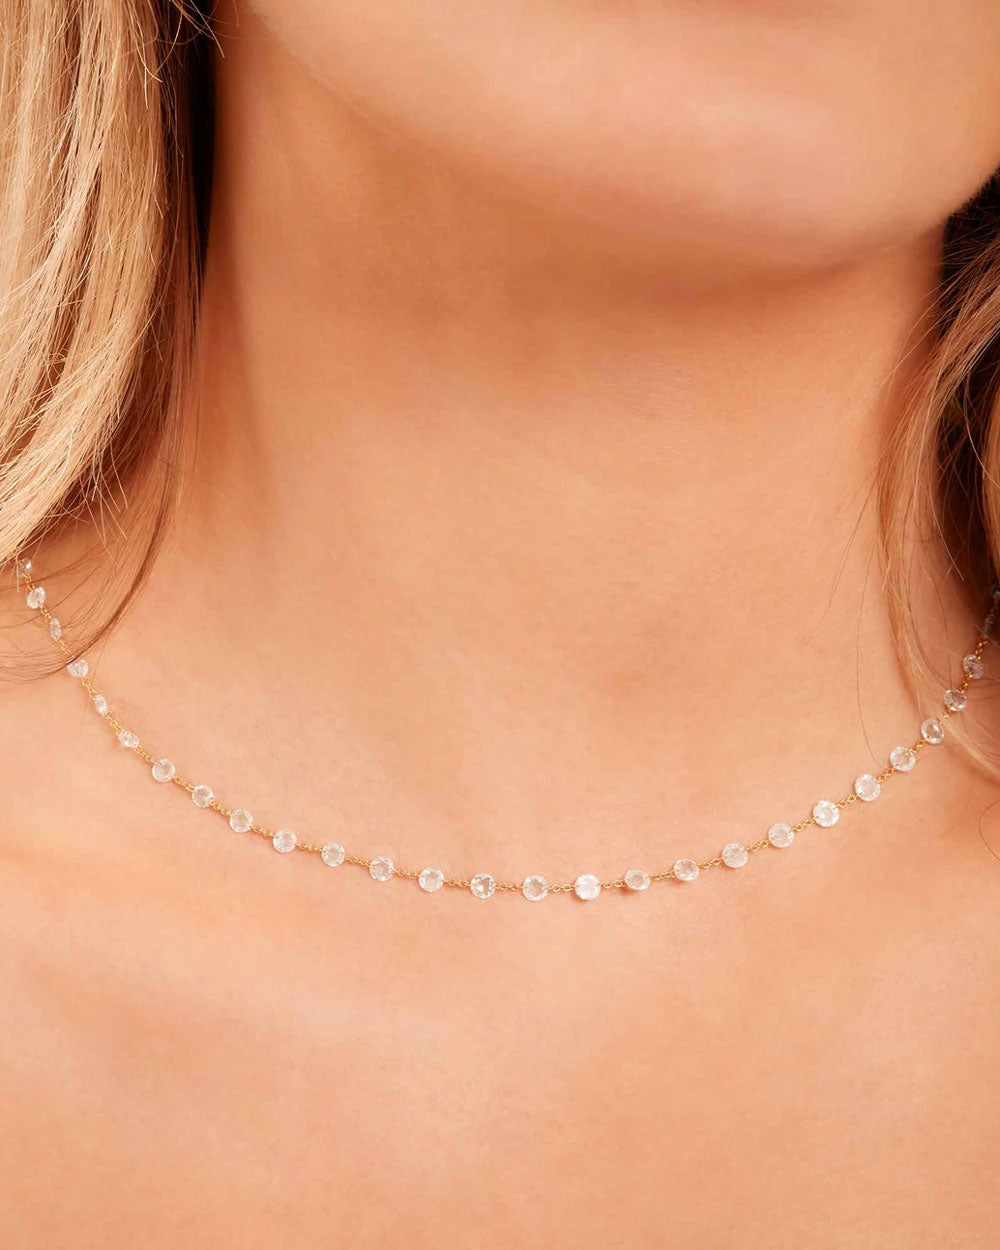 White Gold Ethereal Diamond 3-Link Chain Necklace